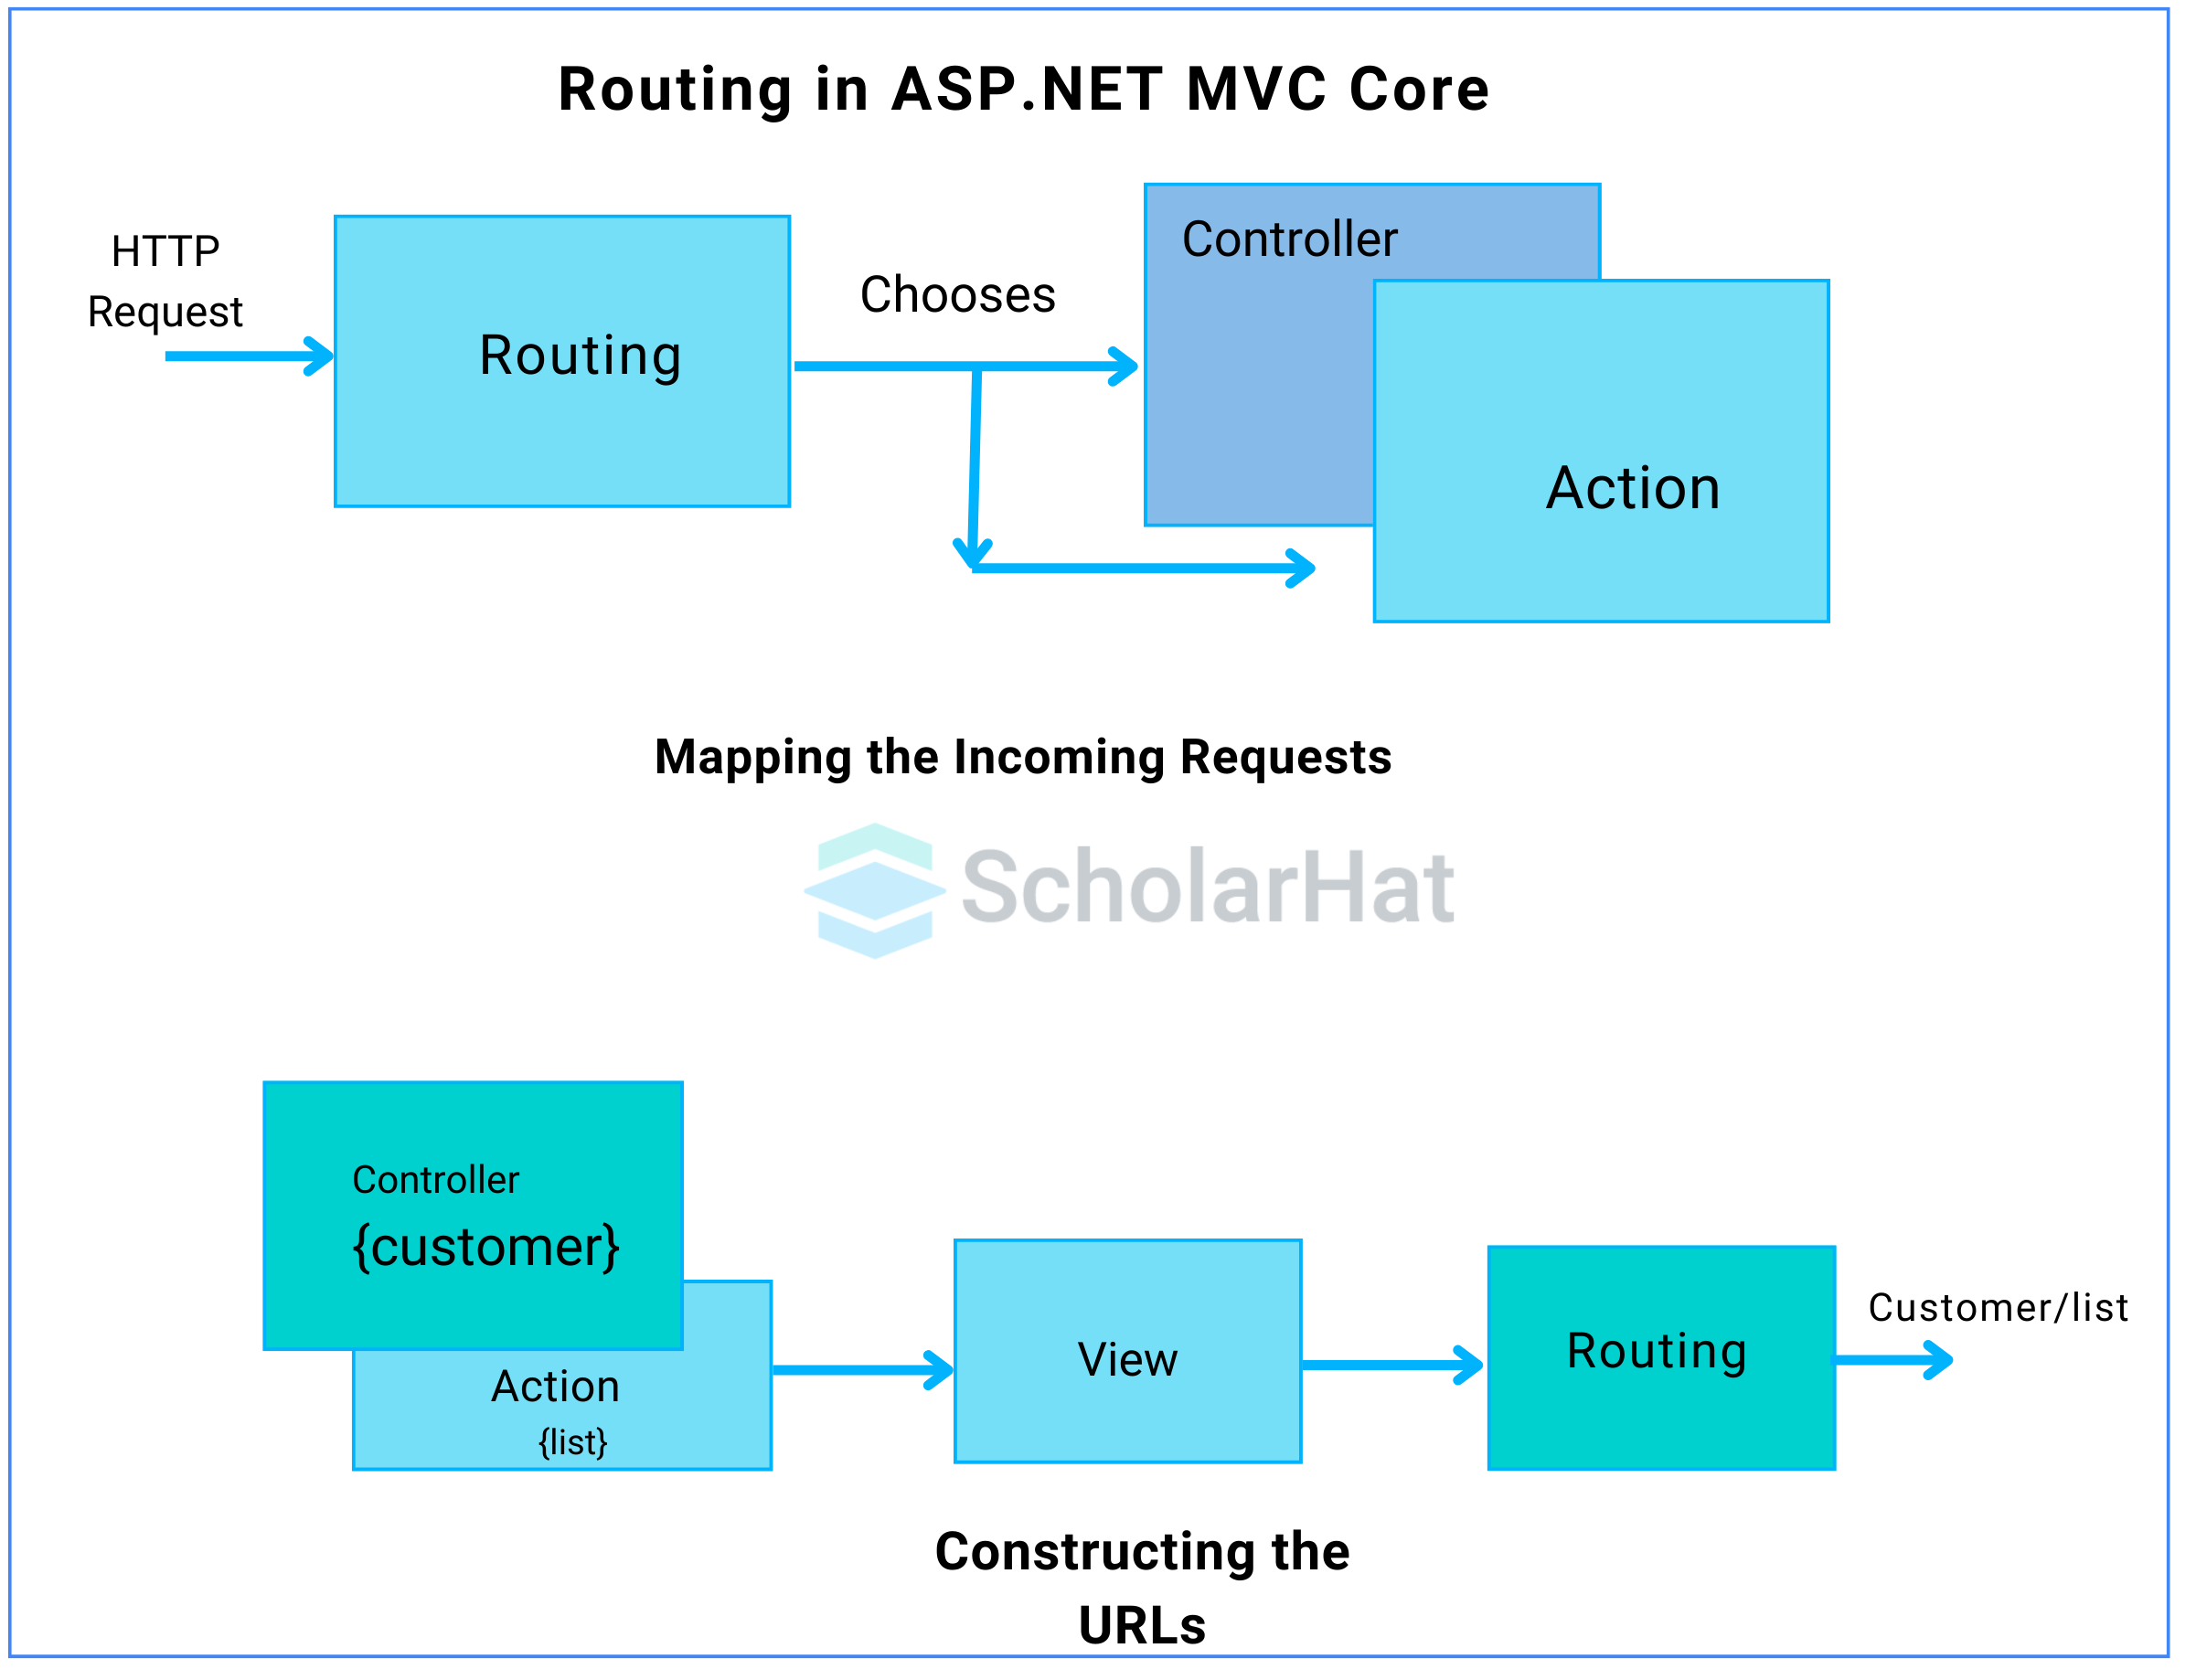 Explain how routing works in ASP.NET Core MVC applications.